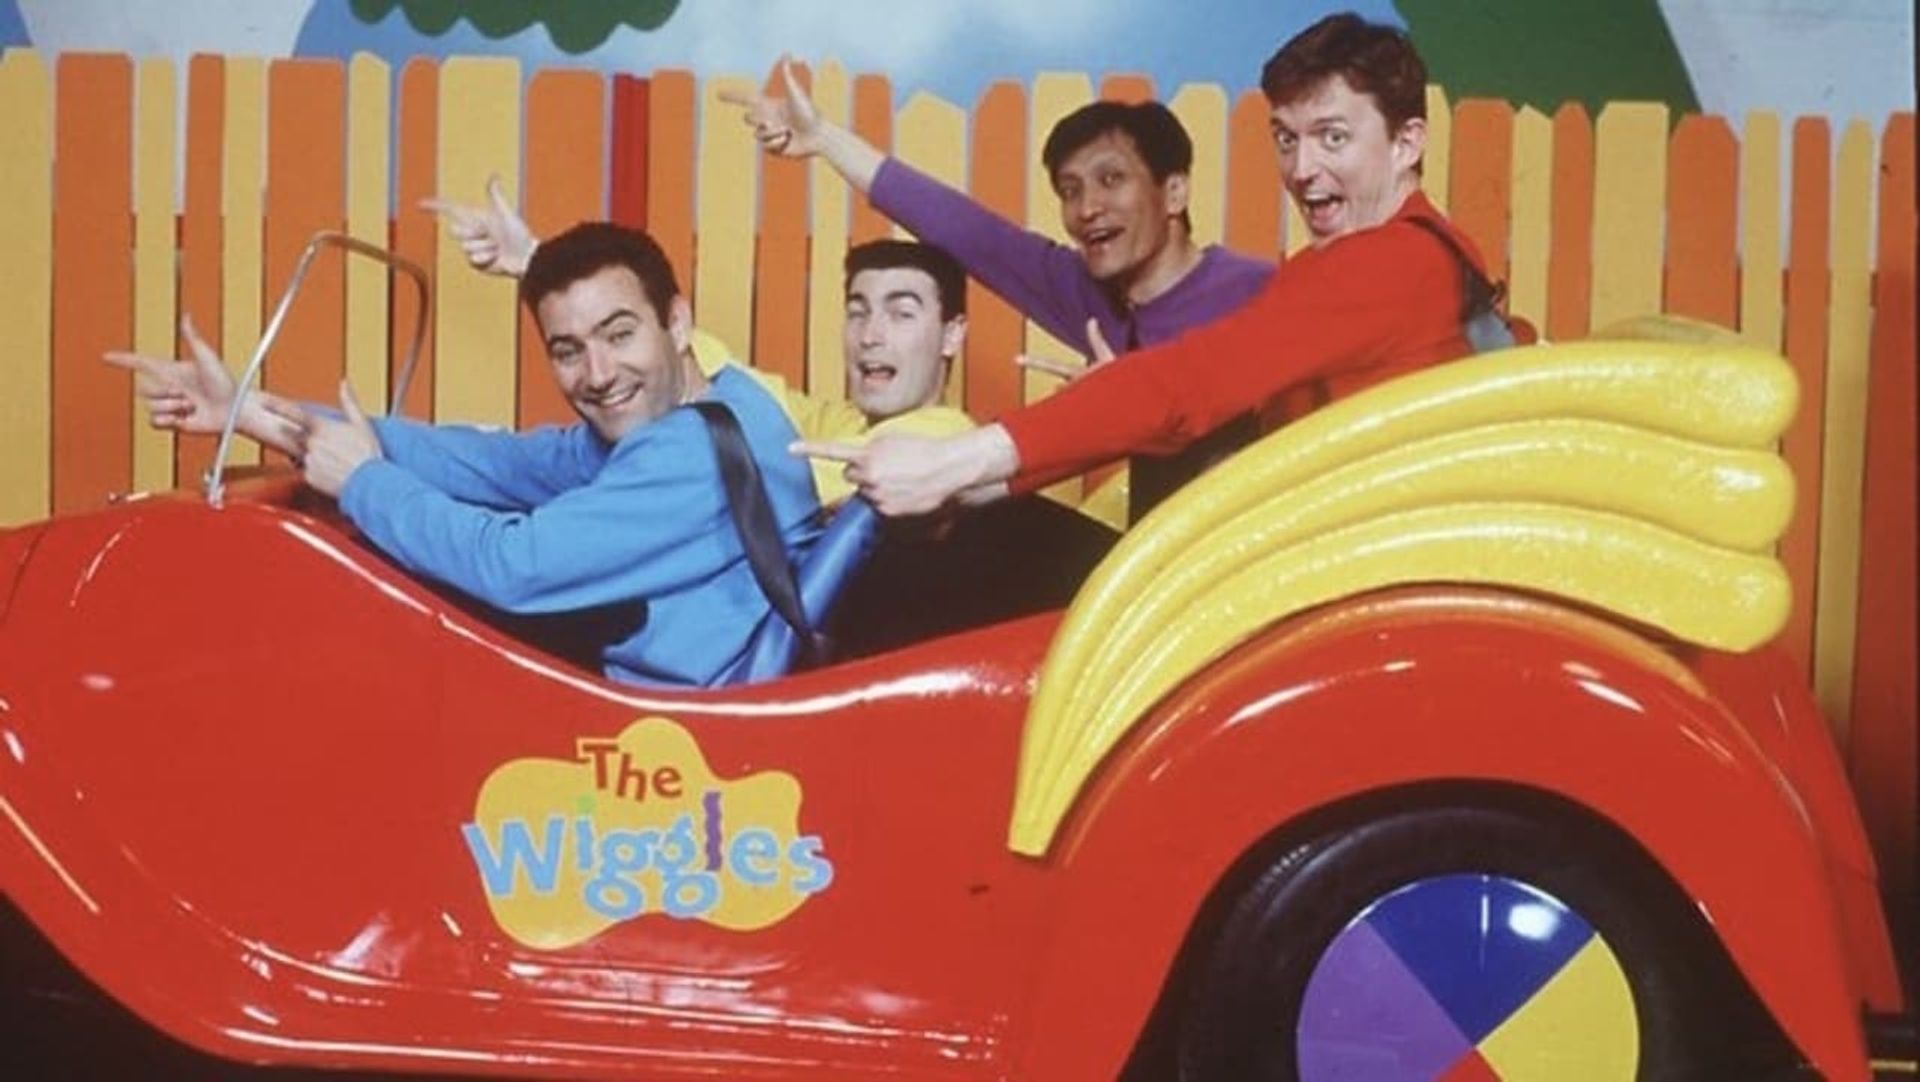 the wiggles magical adventure a wiggly movie trailer